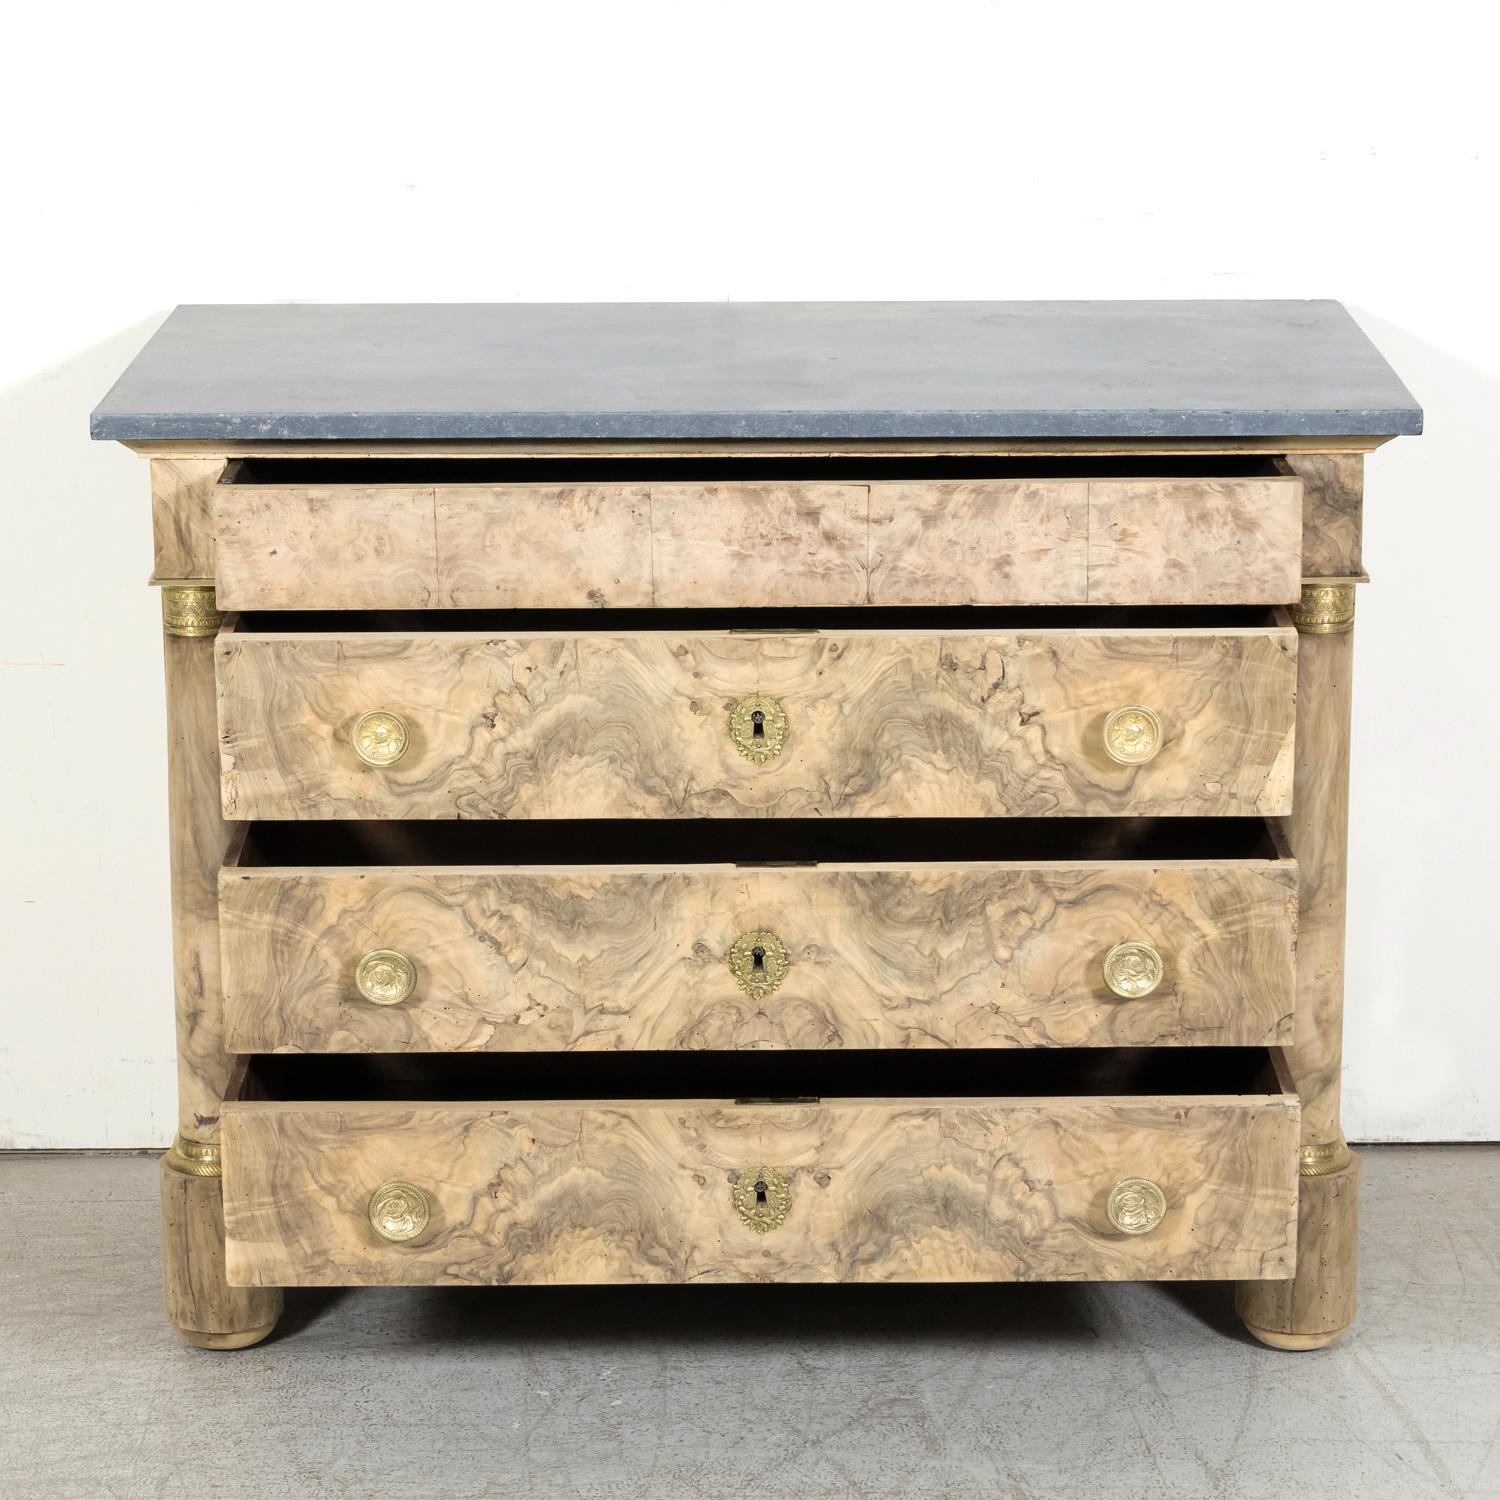 19th Century French Empire Period Bleached Walnut Commode with Marble Top  For Sale 1